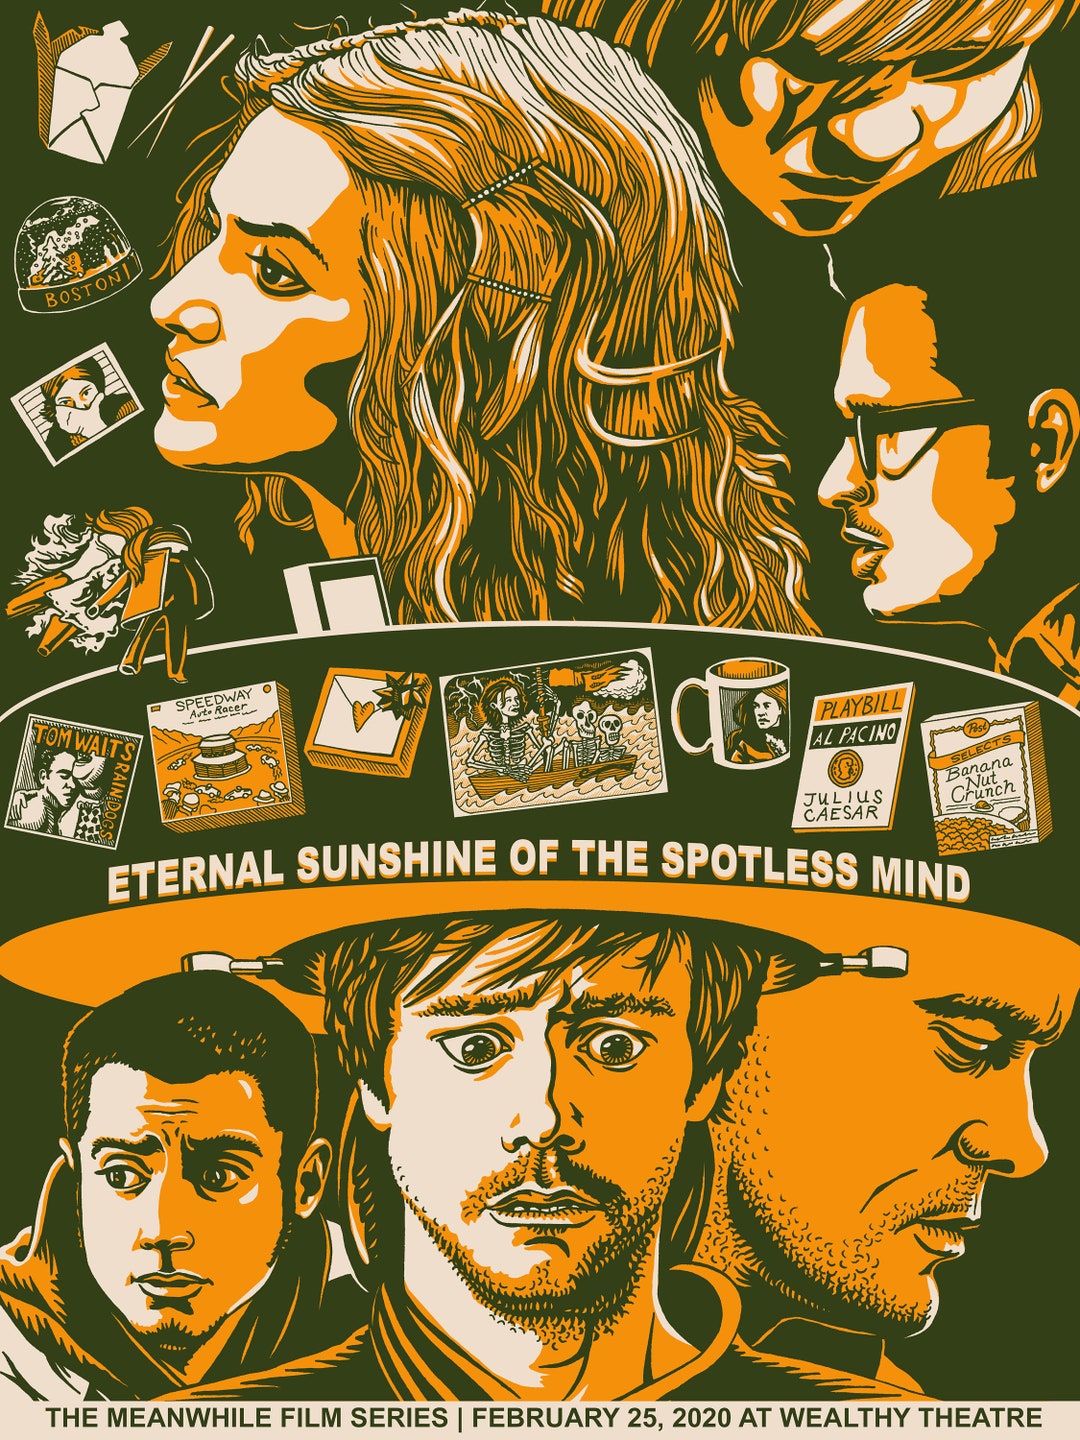 Eternal Sunshine of the Spotless Mind Poster 18x24 - Etsy